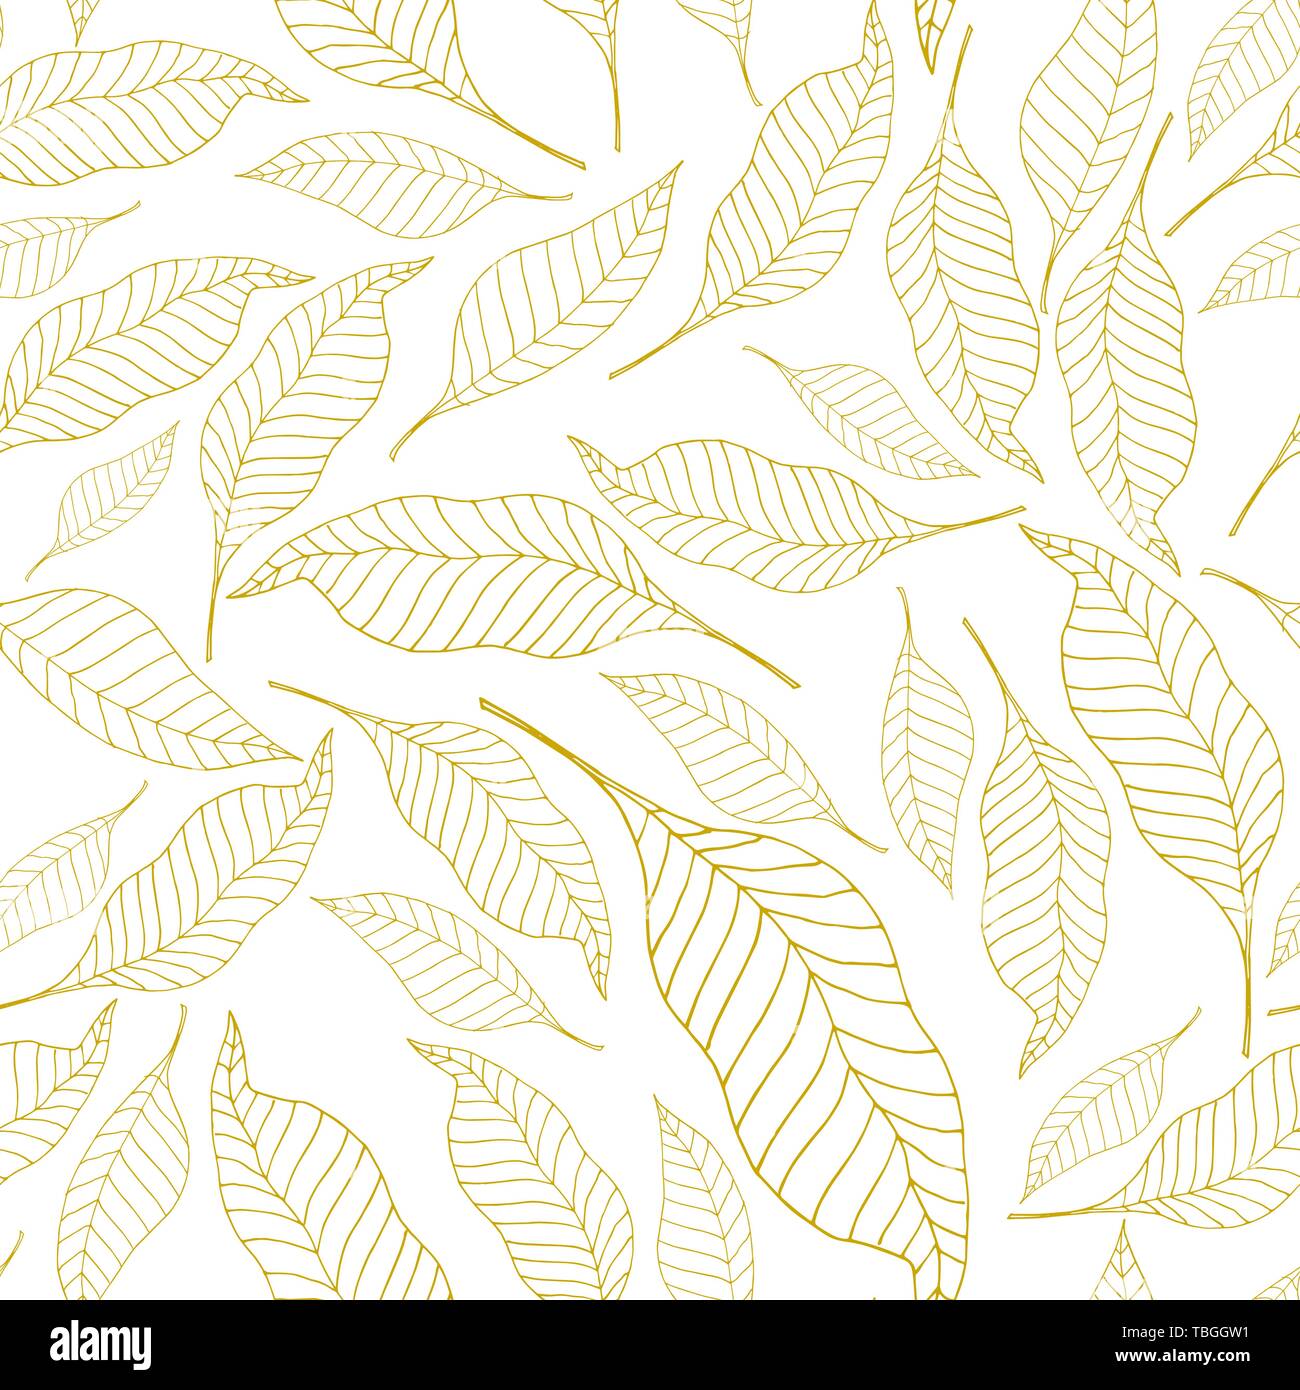 Vector tropical leave wallpaper. Modern abstract floral illustration on ...